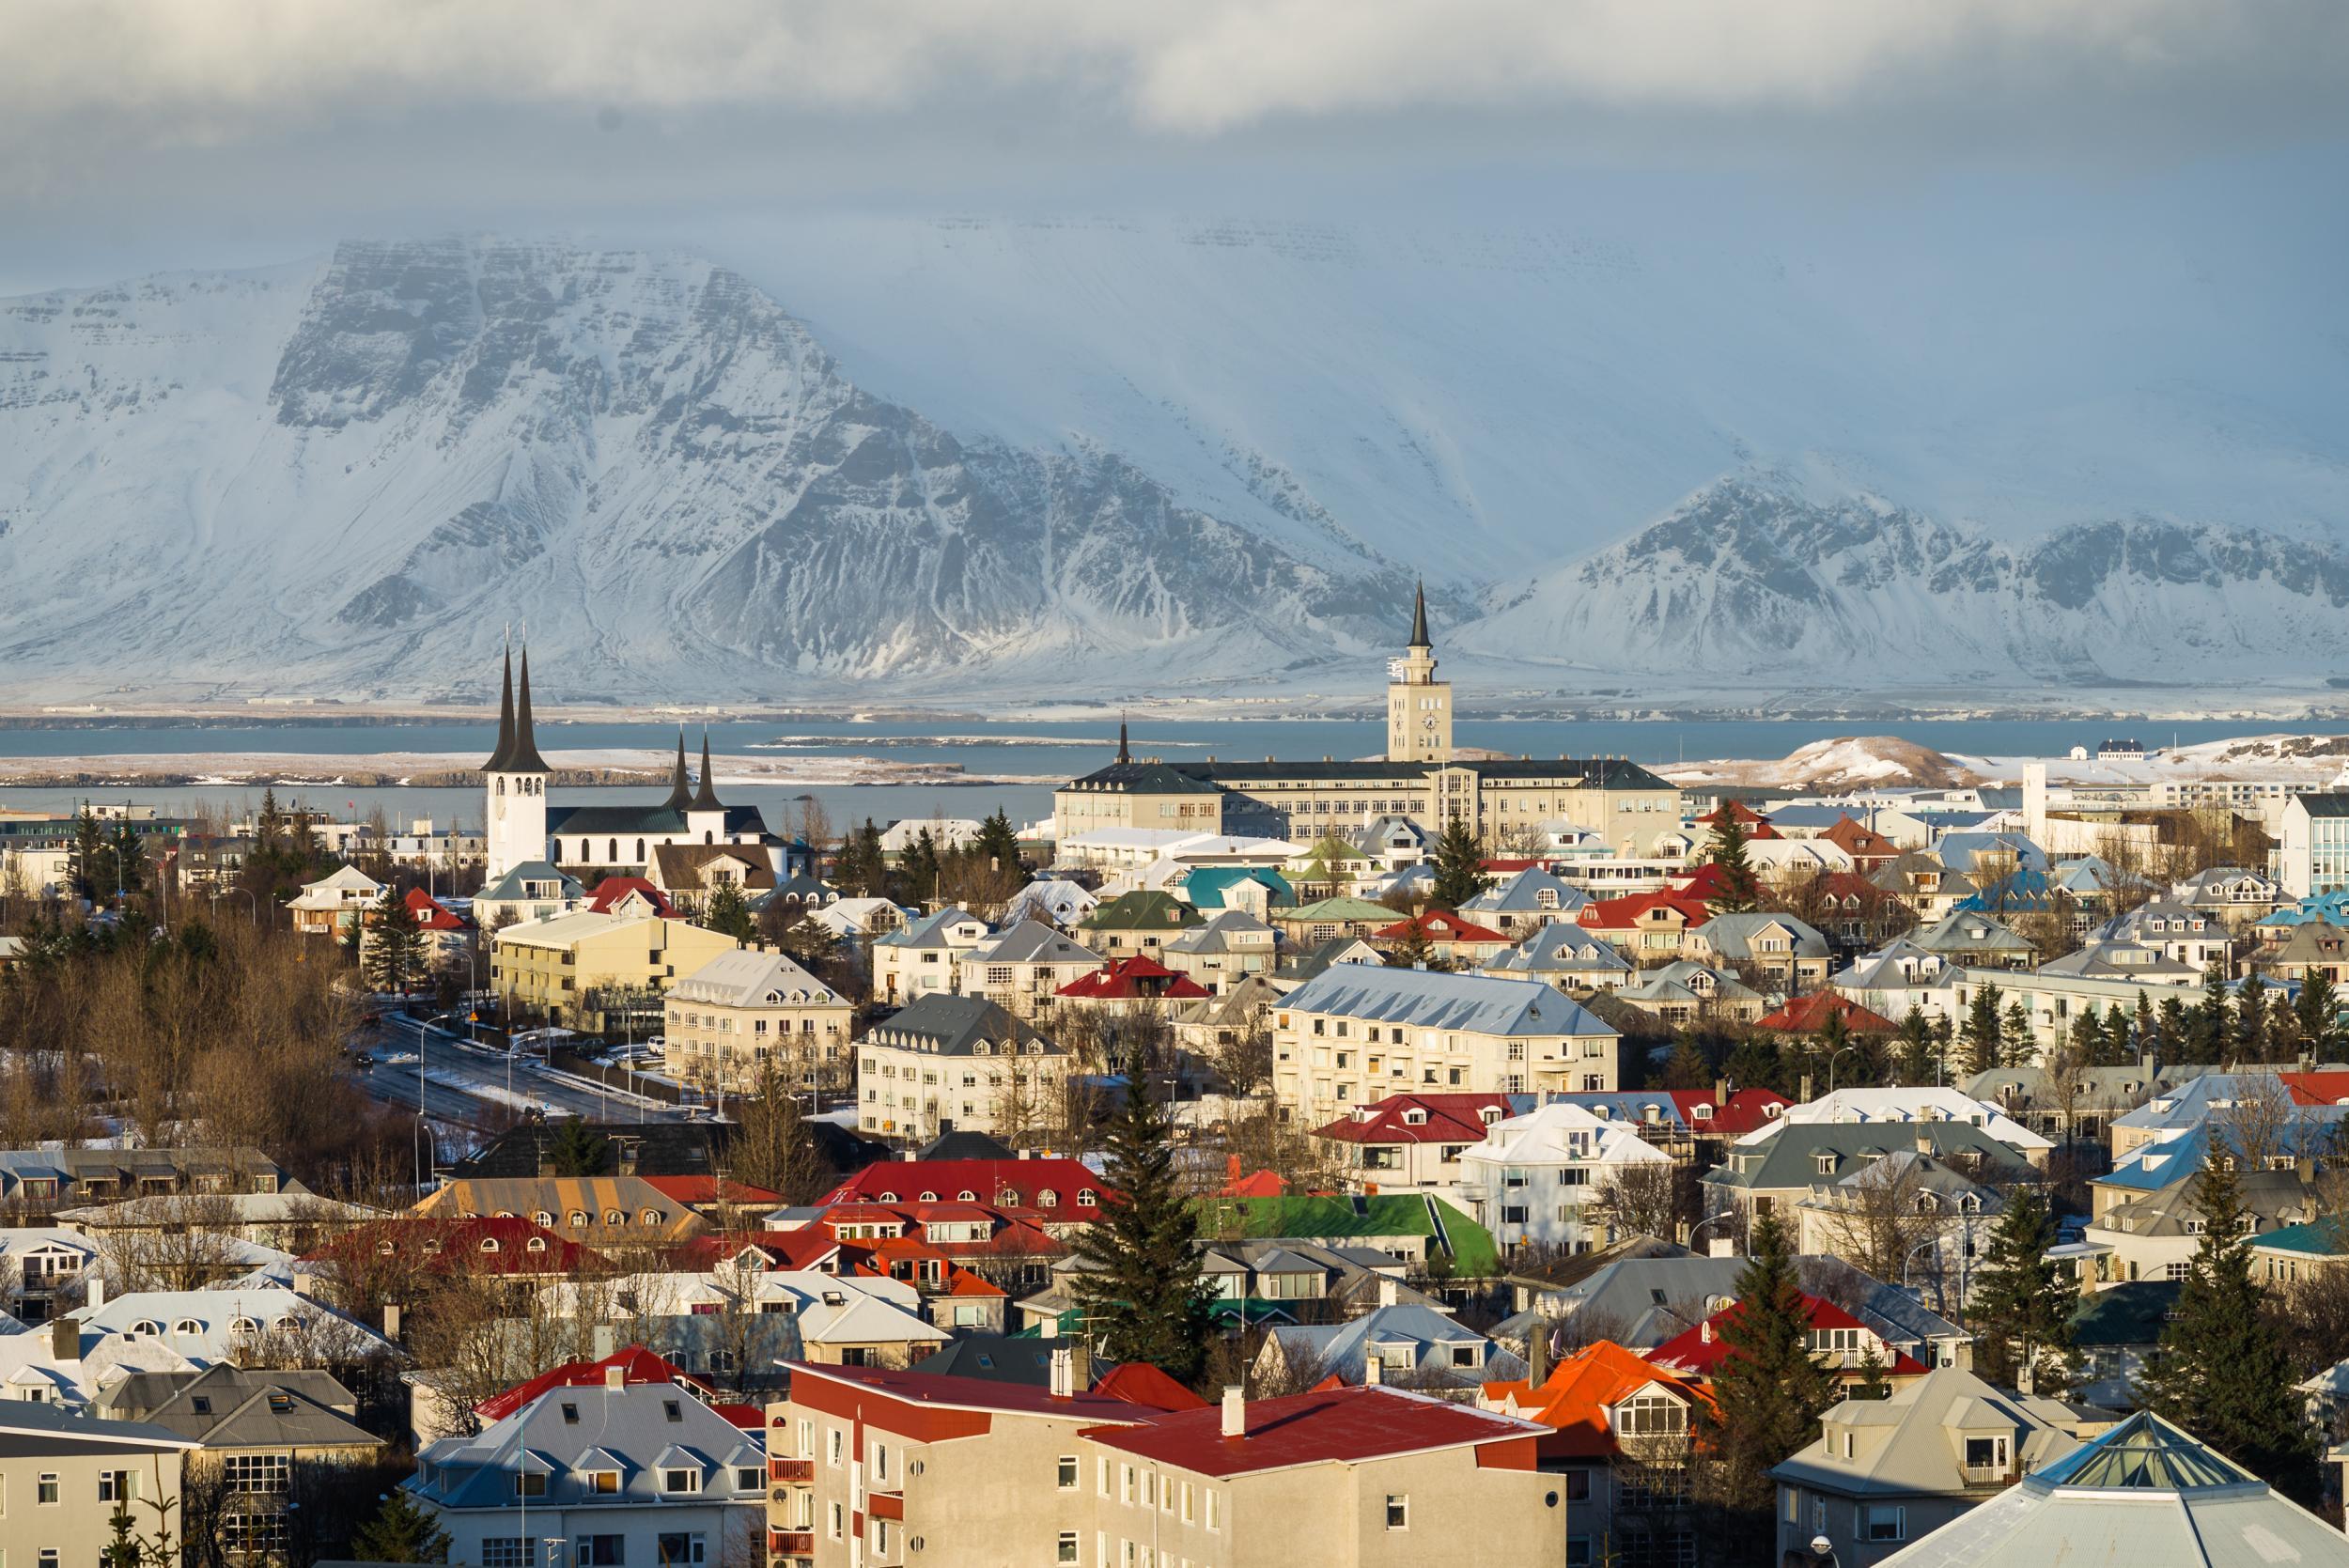 The Icelandic capital Reykjavik has a gorgeous natural backdrop and colourful houses